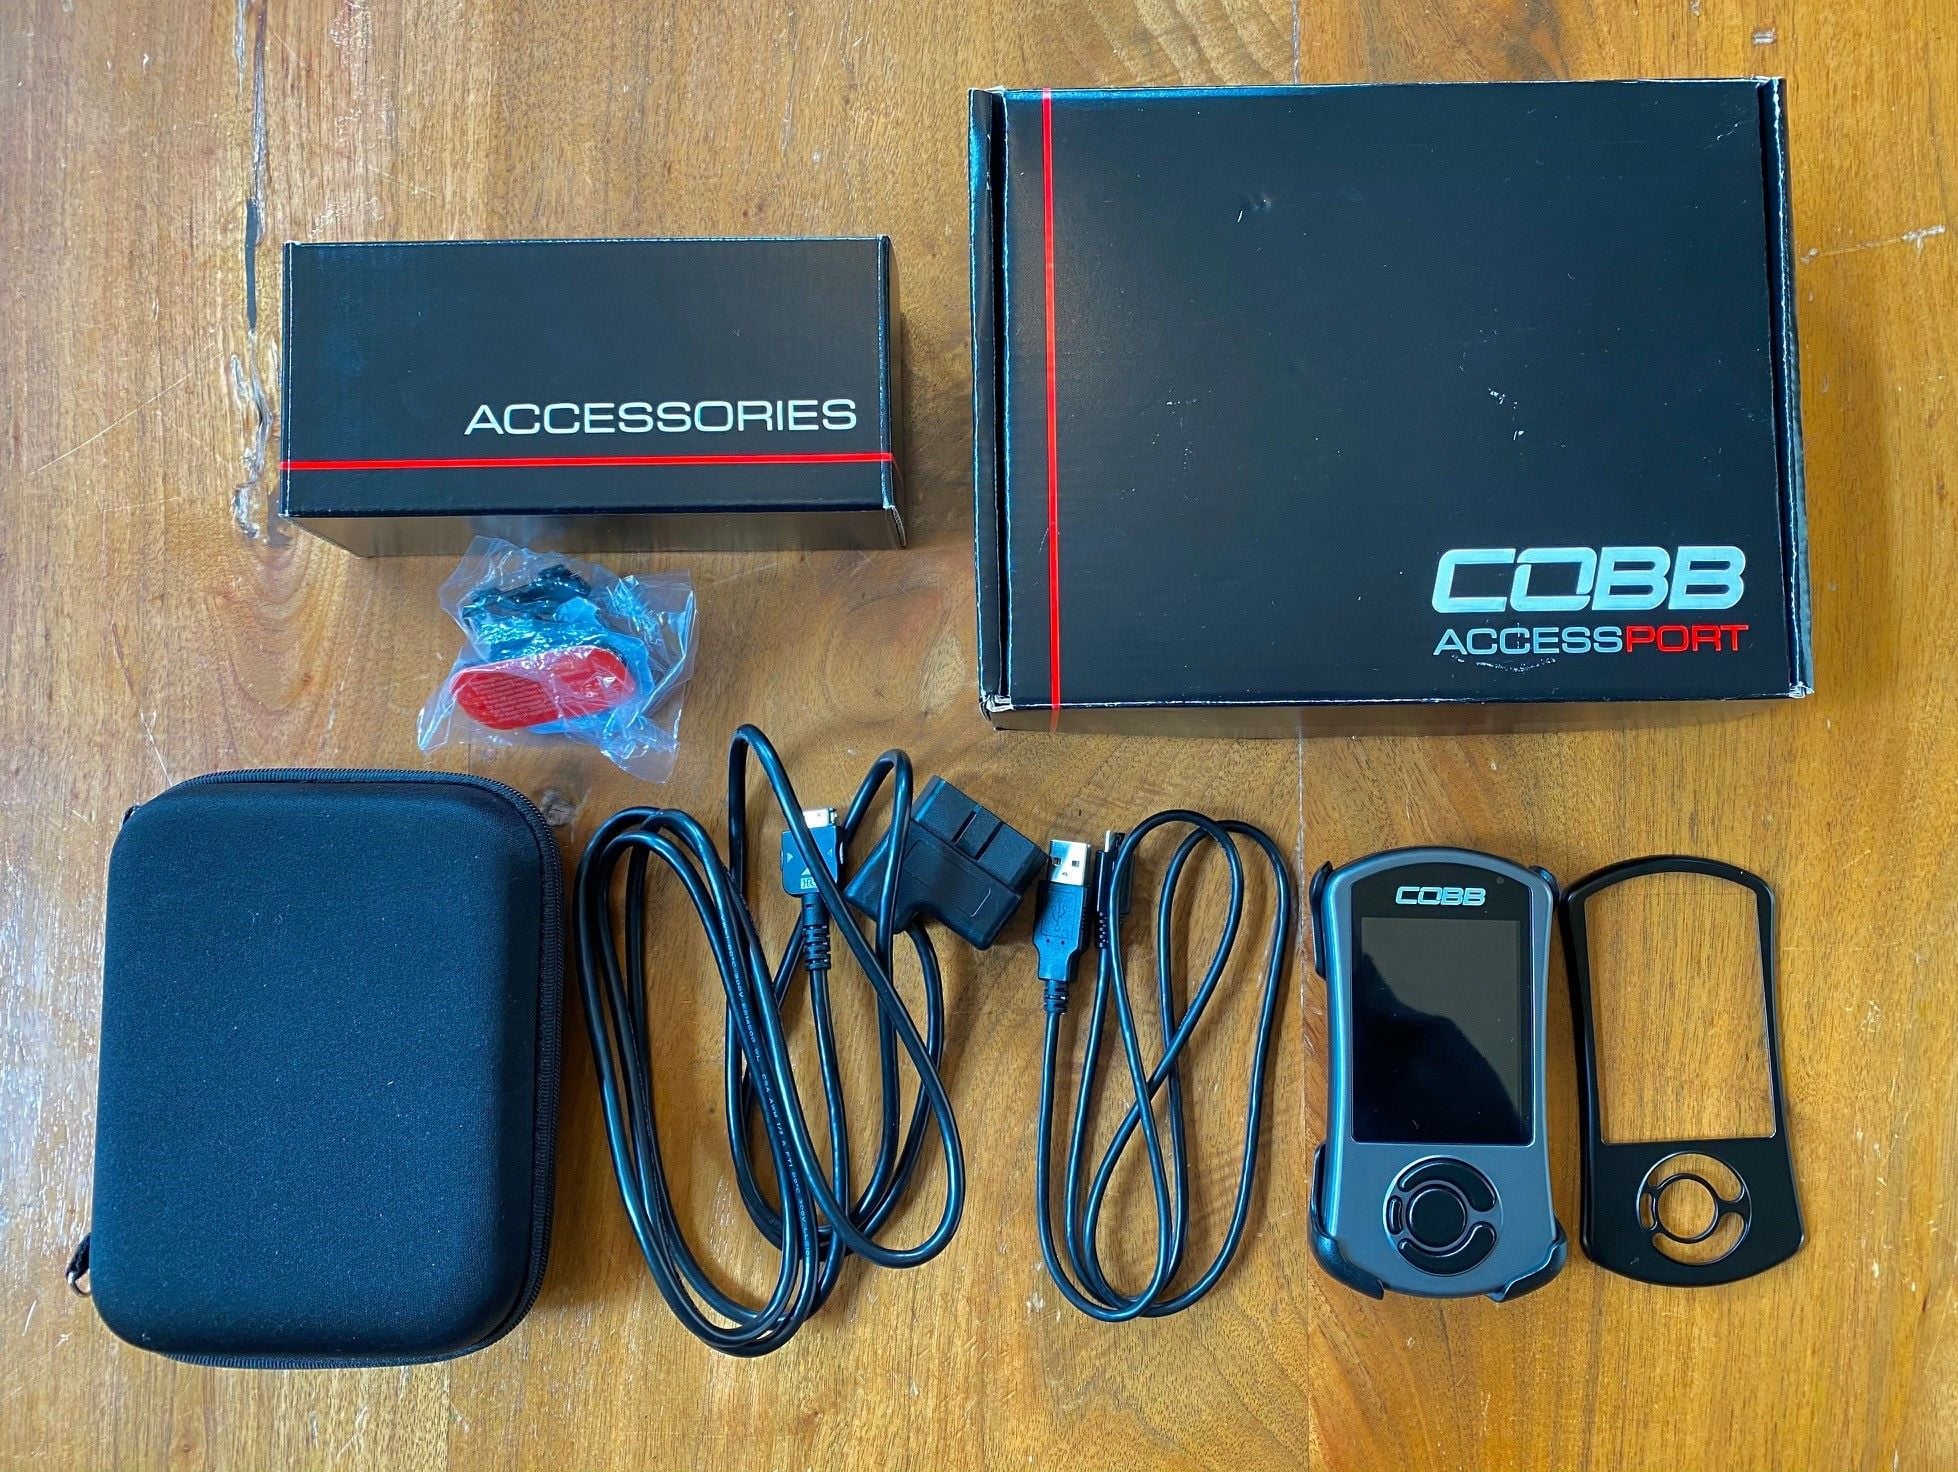 Accessories - Cobb AccessPort v3 with PDK Flashing (997.2 TT/TTS) - Used - 2010 to 2013 Porsche 911 - Seattle, WA 98116, United States